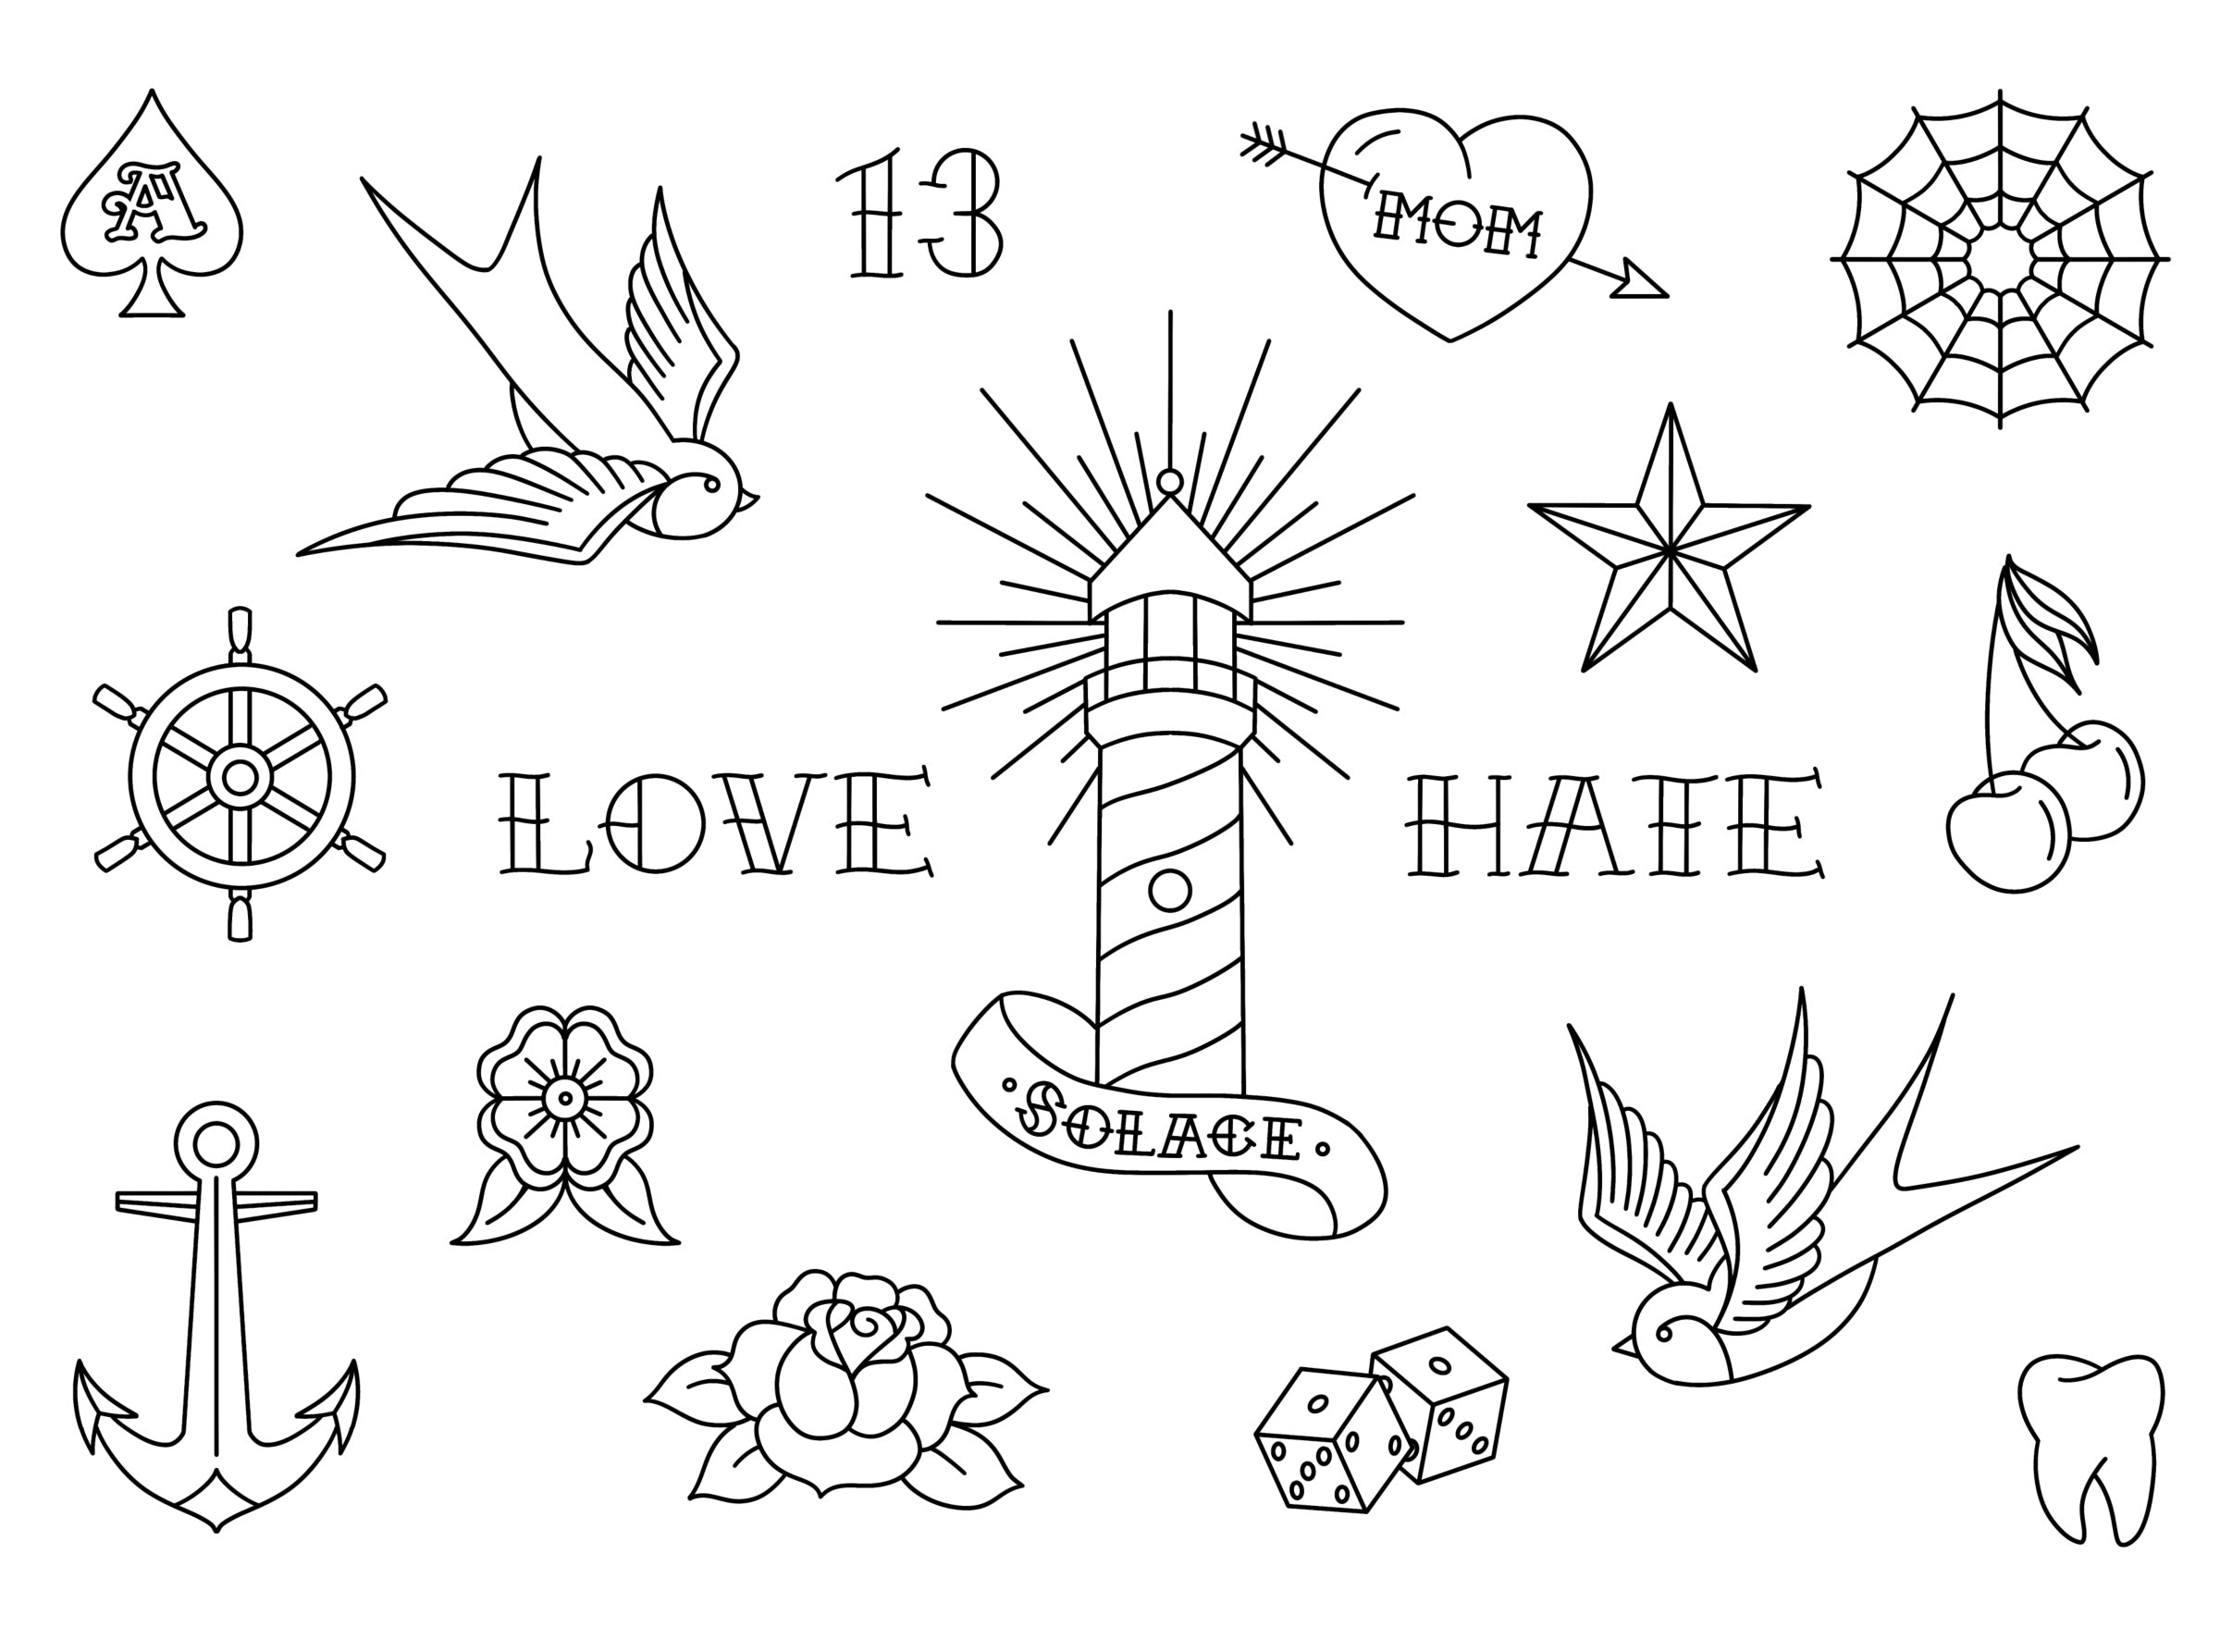 Pre-made Ready to Use Flash Tattoo Stencils Set of 4 - Etsy